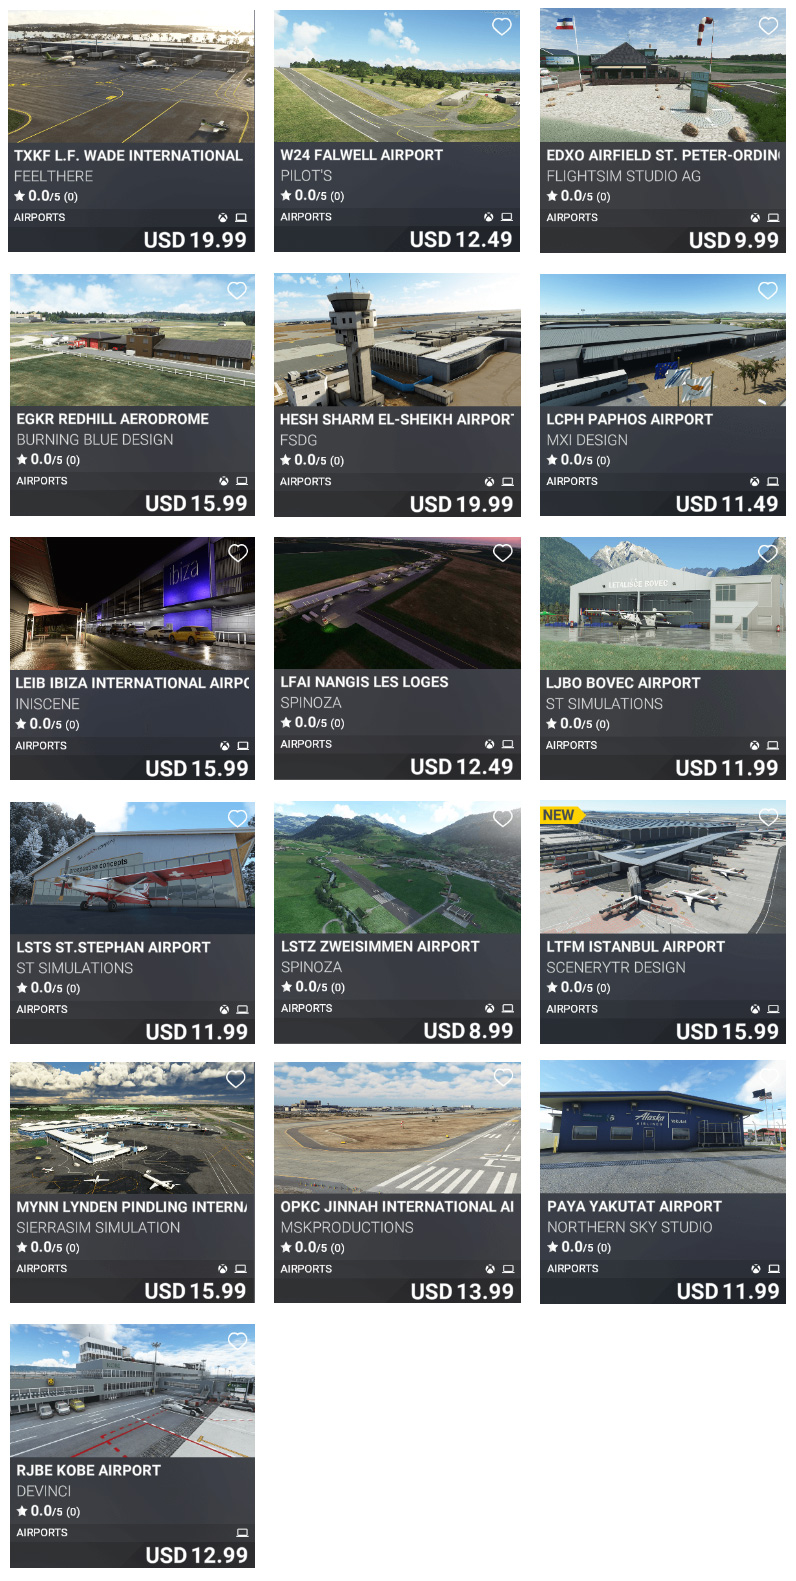 msfs marketplace update sept 1 2022 airports